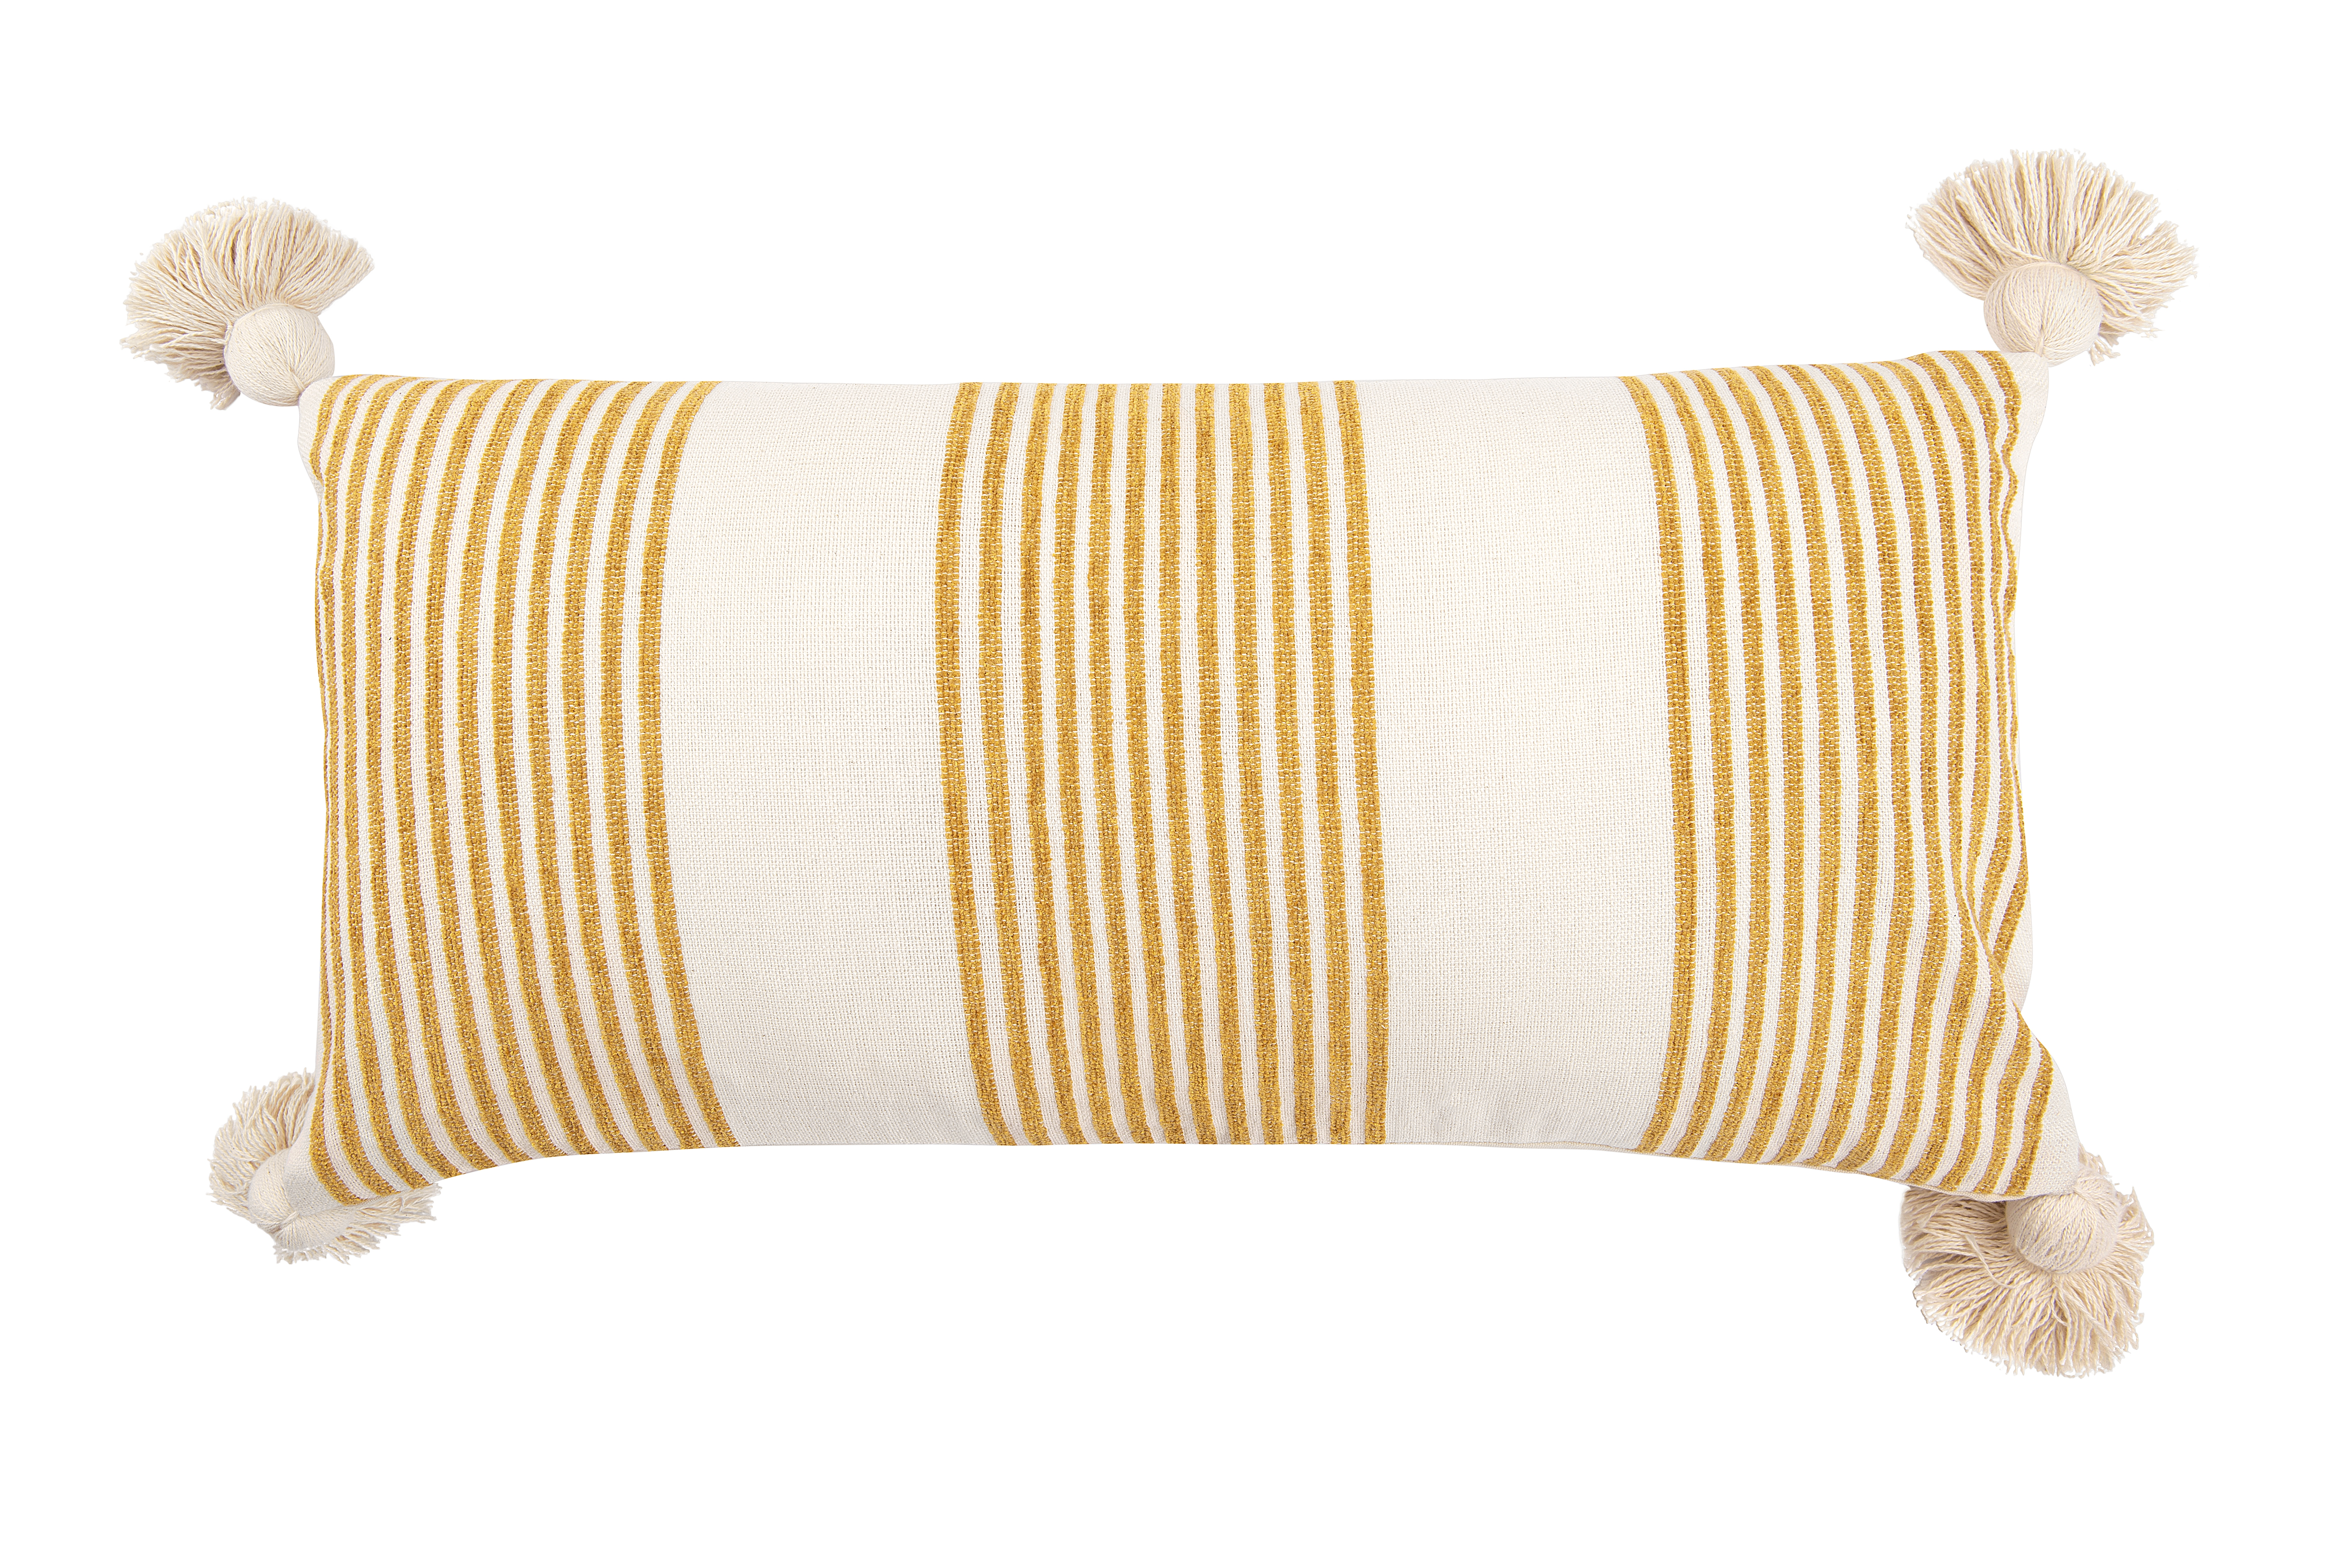 Cream Cotton & Chenille Pillow with Vertical Mustard Stripes, Tassels & Solid Cream Back - Image 0